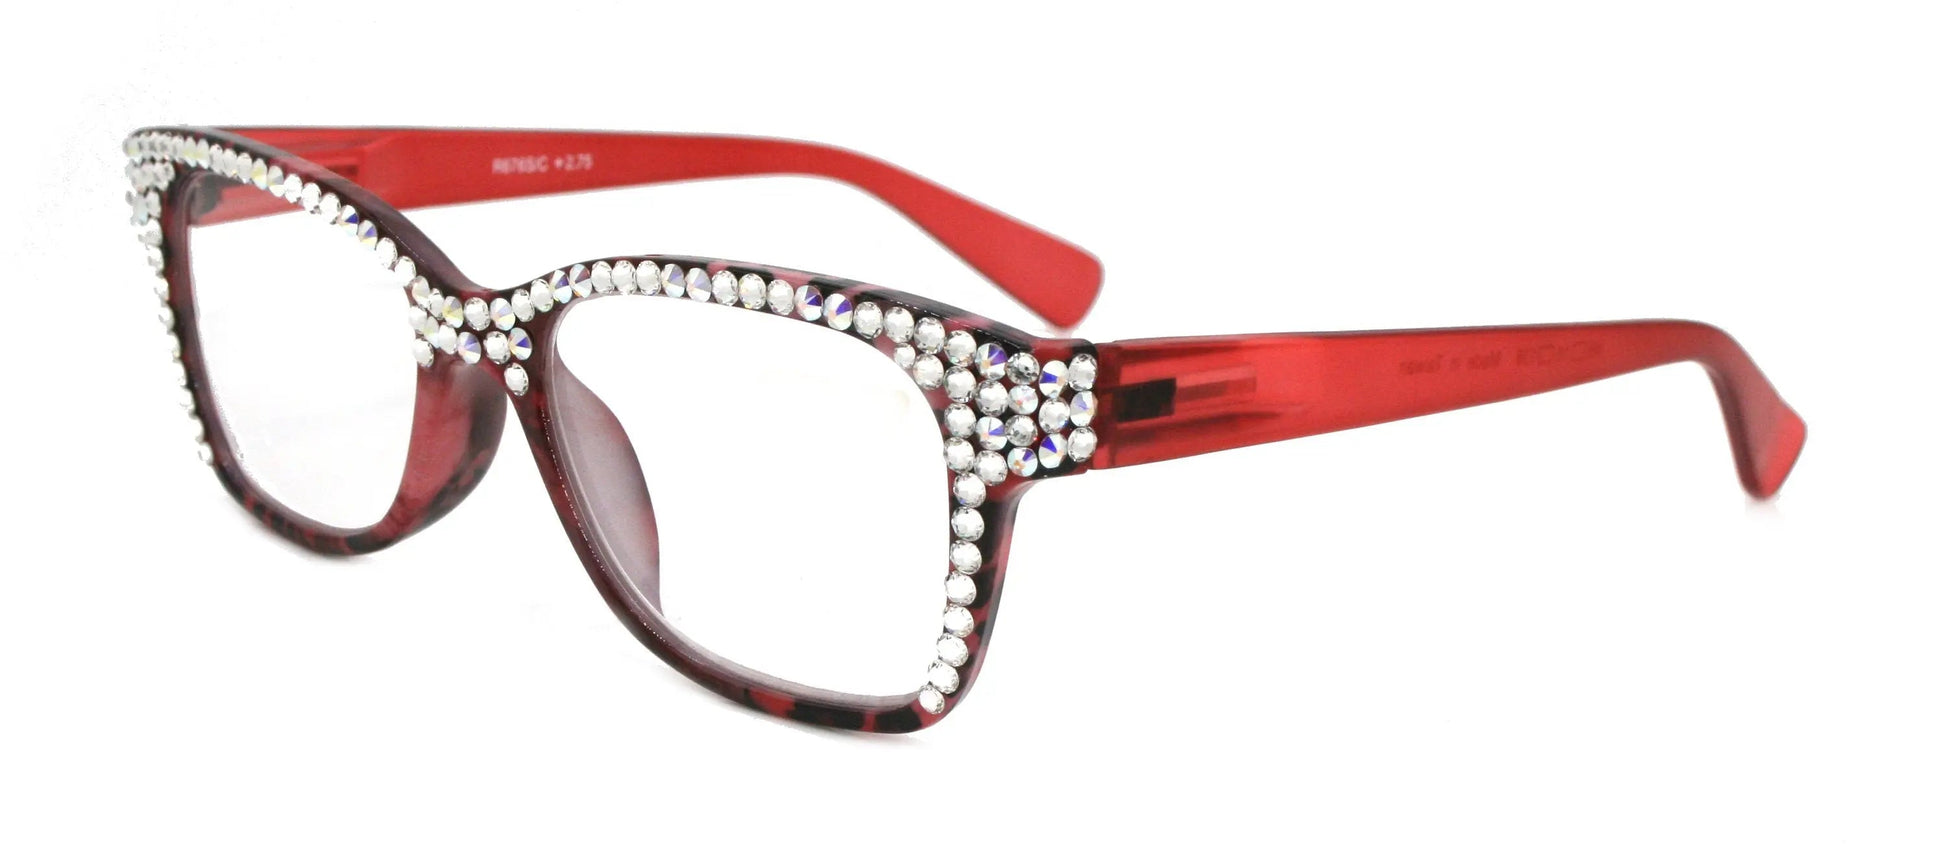 The Bohemian, (Bling) Women Reading Glasses W (Full Top) (Clear, AB Aurora Borealis) Genuine European Crystals. (Black, Red) NY Fifth Avenue 